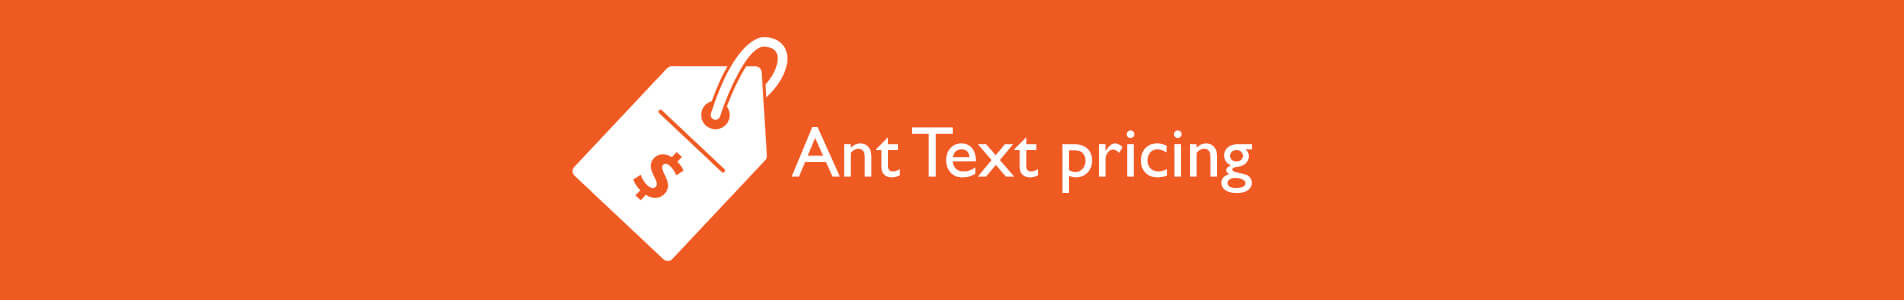 Header Ant Text pricing